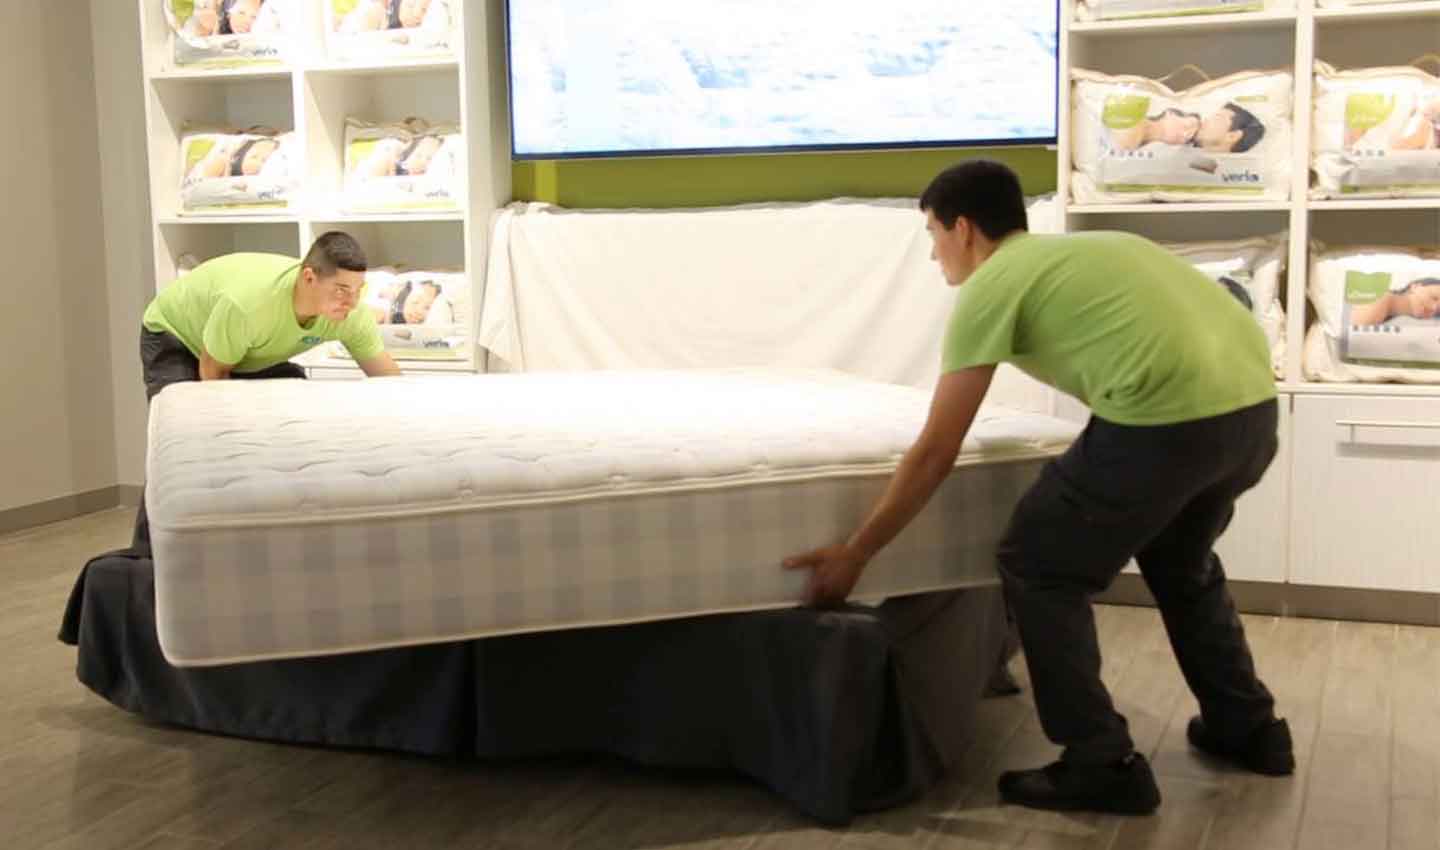 How often Should You Flip or Rotate Your Mattress?